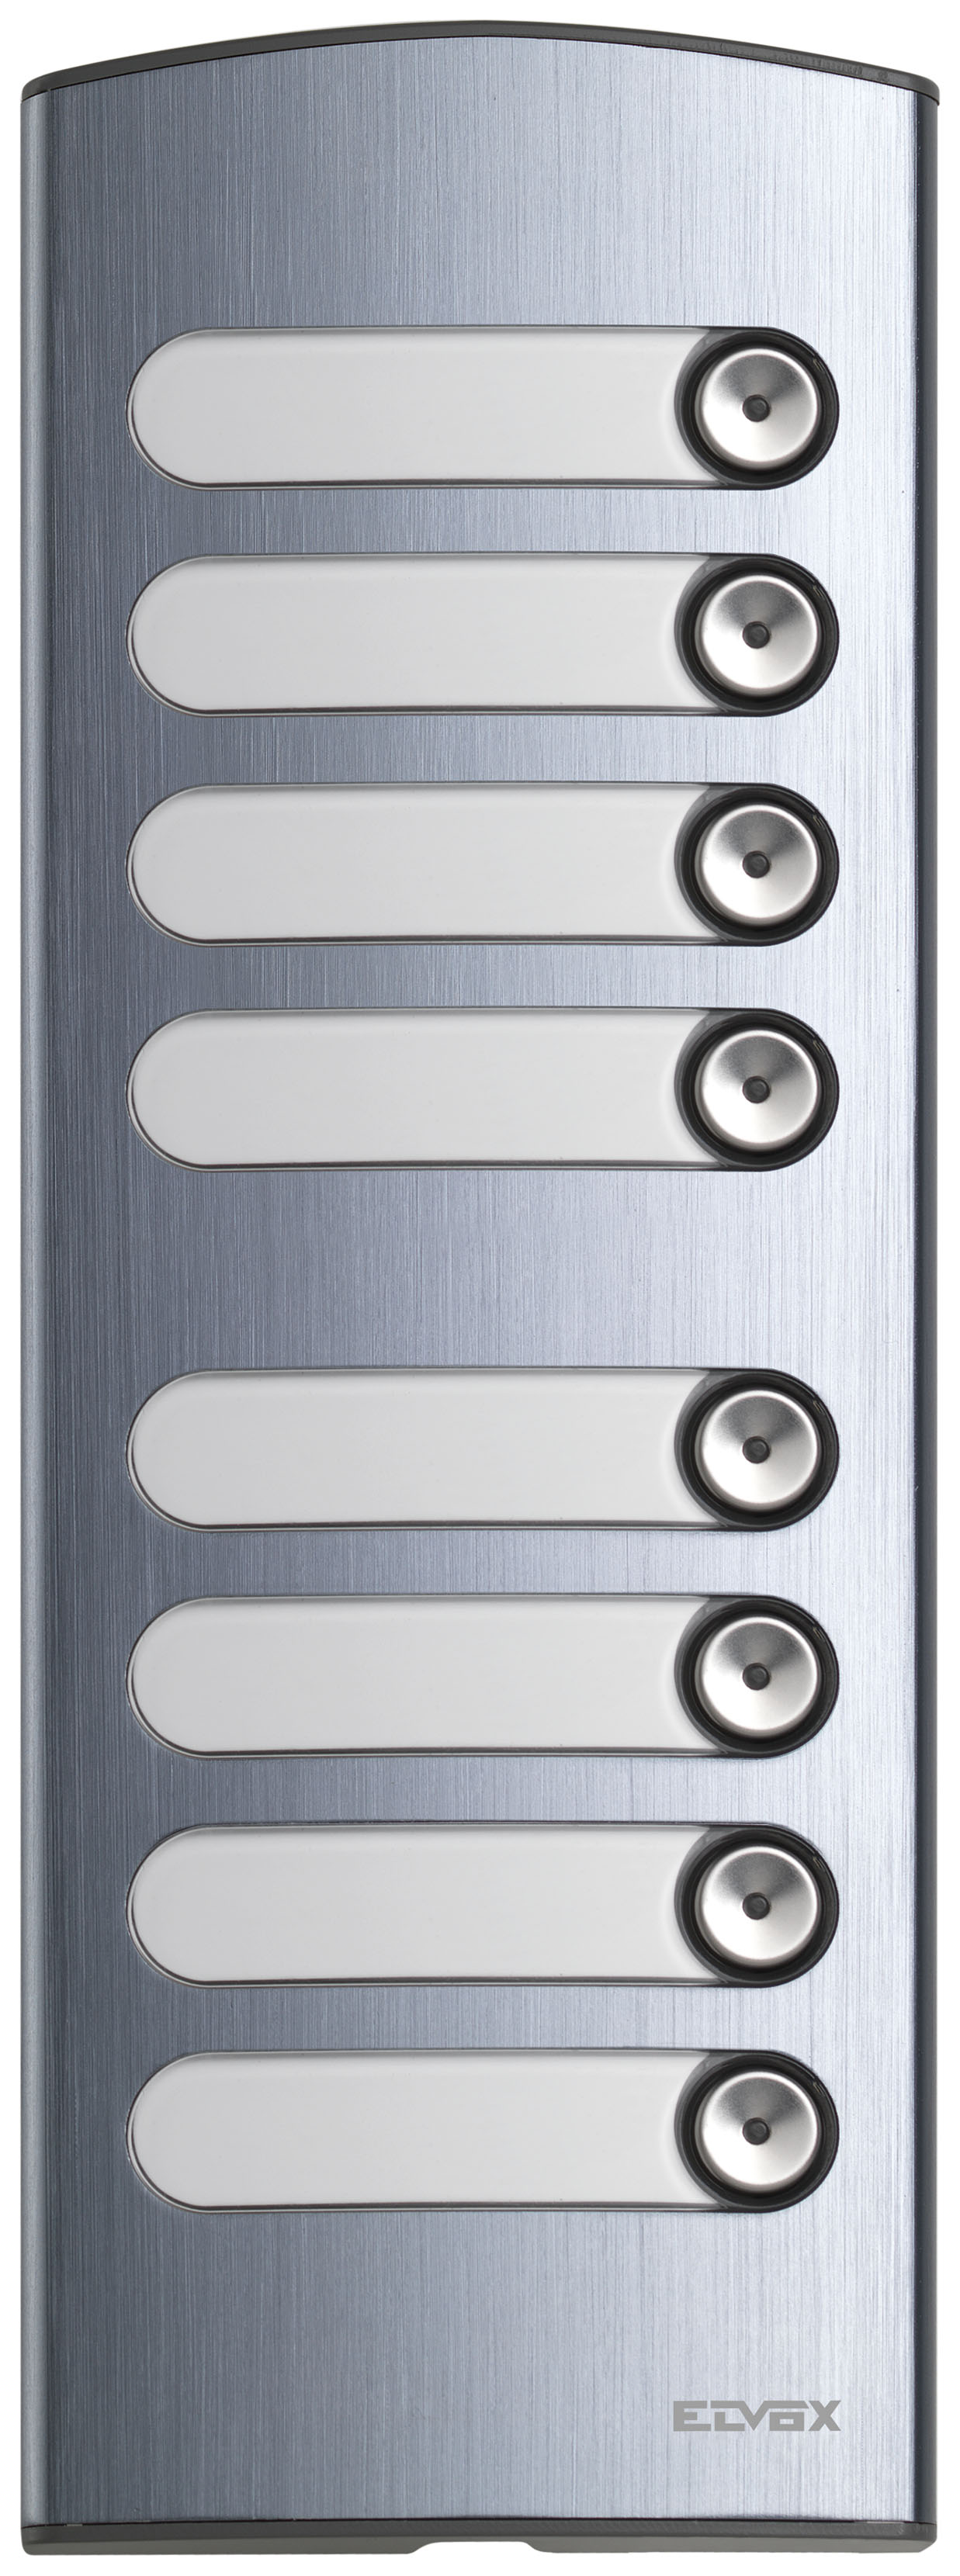 ELVOX 2-Module additional cover plate w/ 8 buttons, elecropolished anodized aluminium